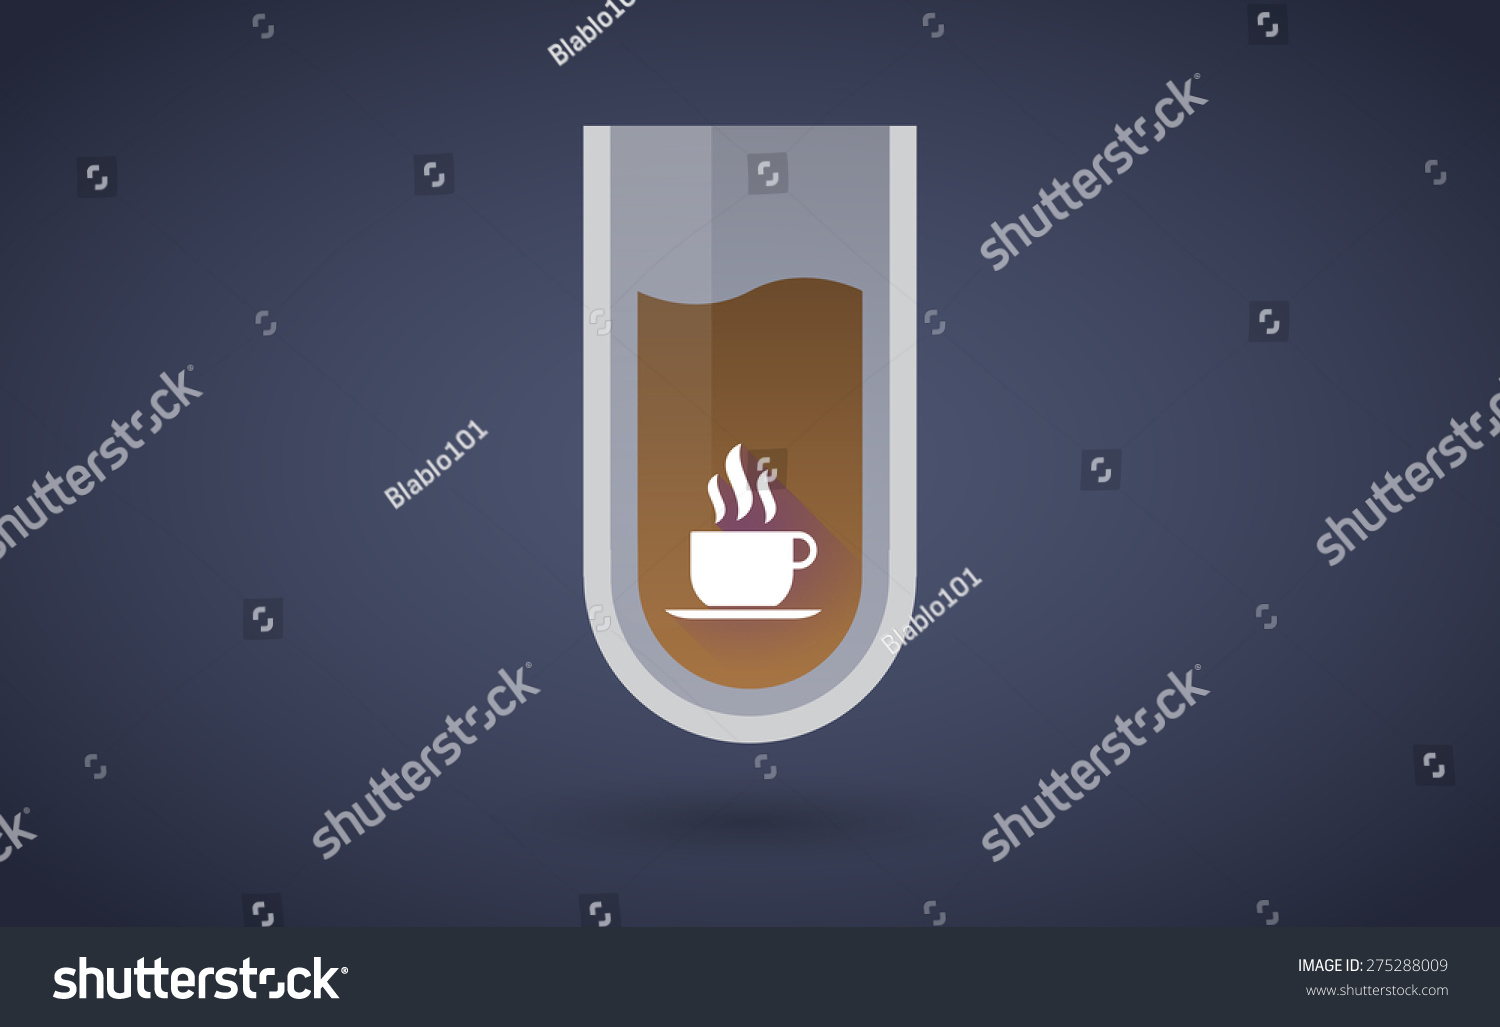 Illustration Brown Test Tube Icon Coffee Stock Vector 275288009 - Shutterstock